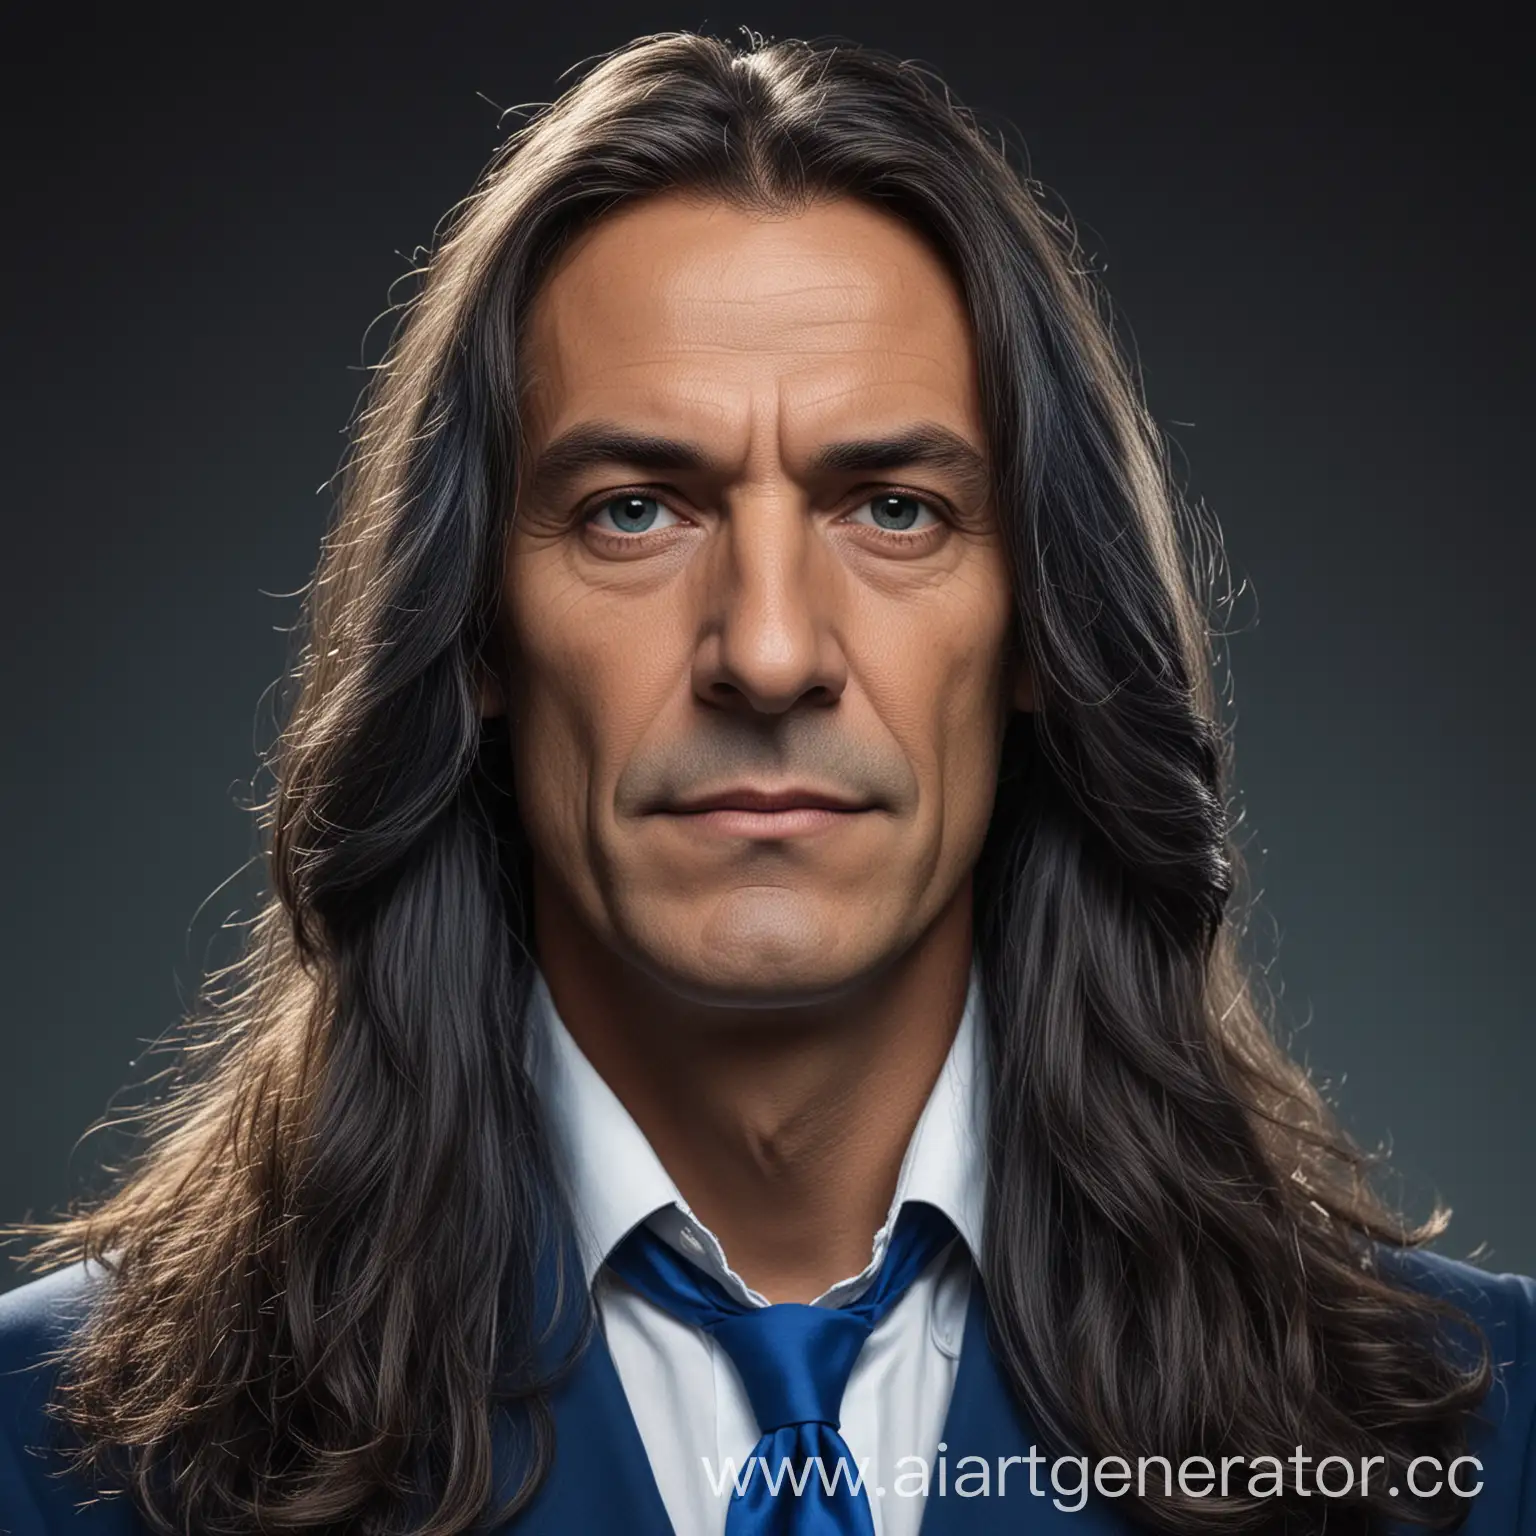 Matelo-Grandro-President-of-the-Blue-Republic-with-Majestic-Long-Hair